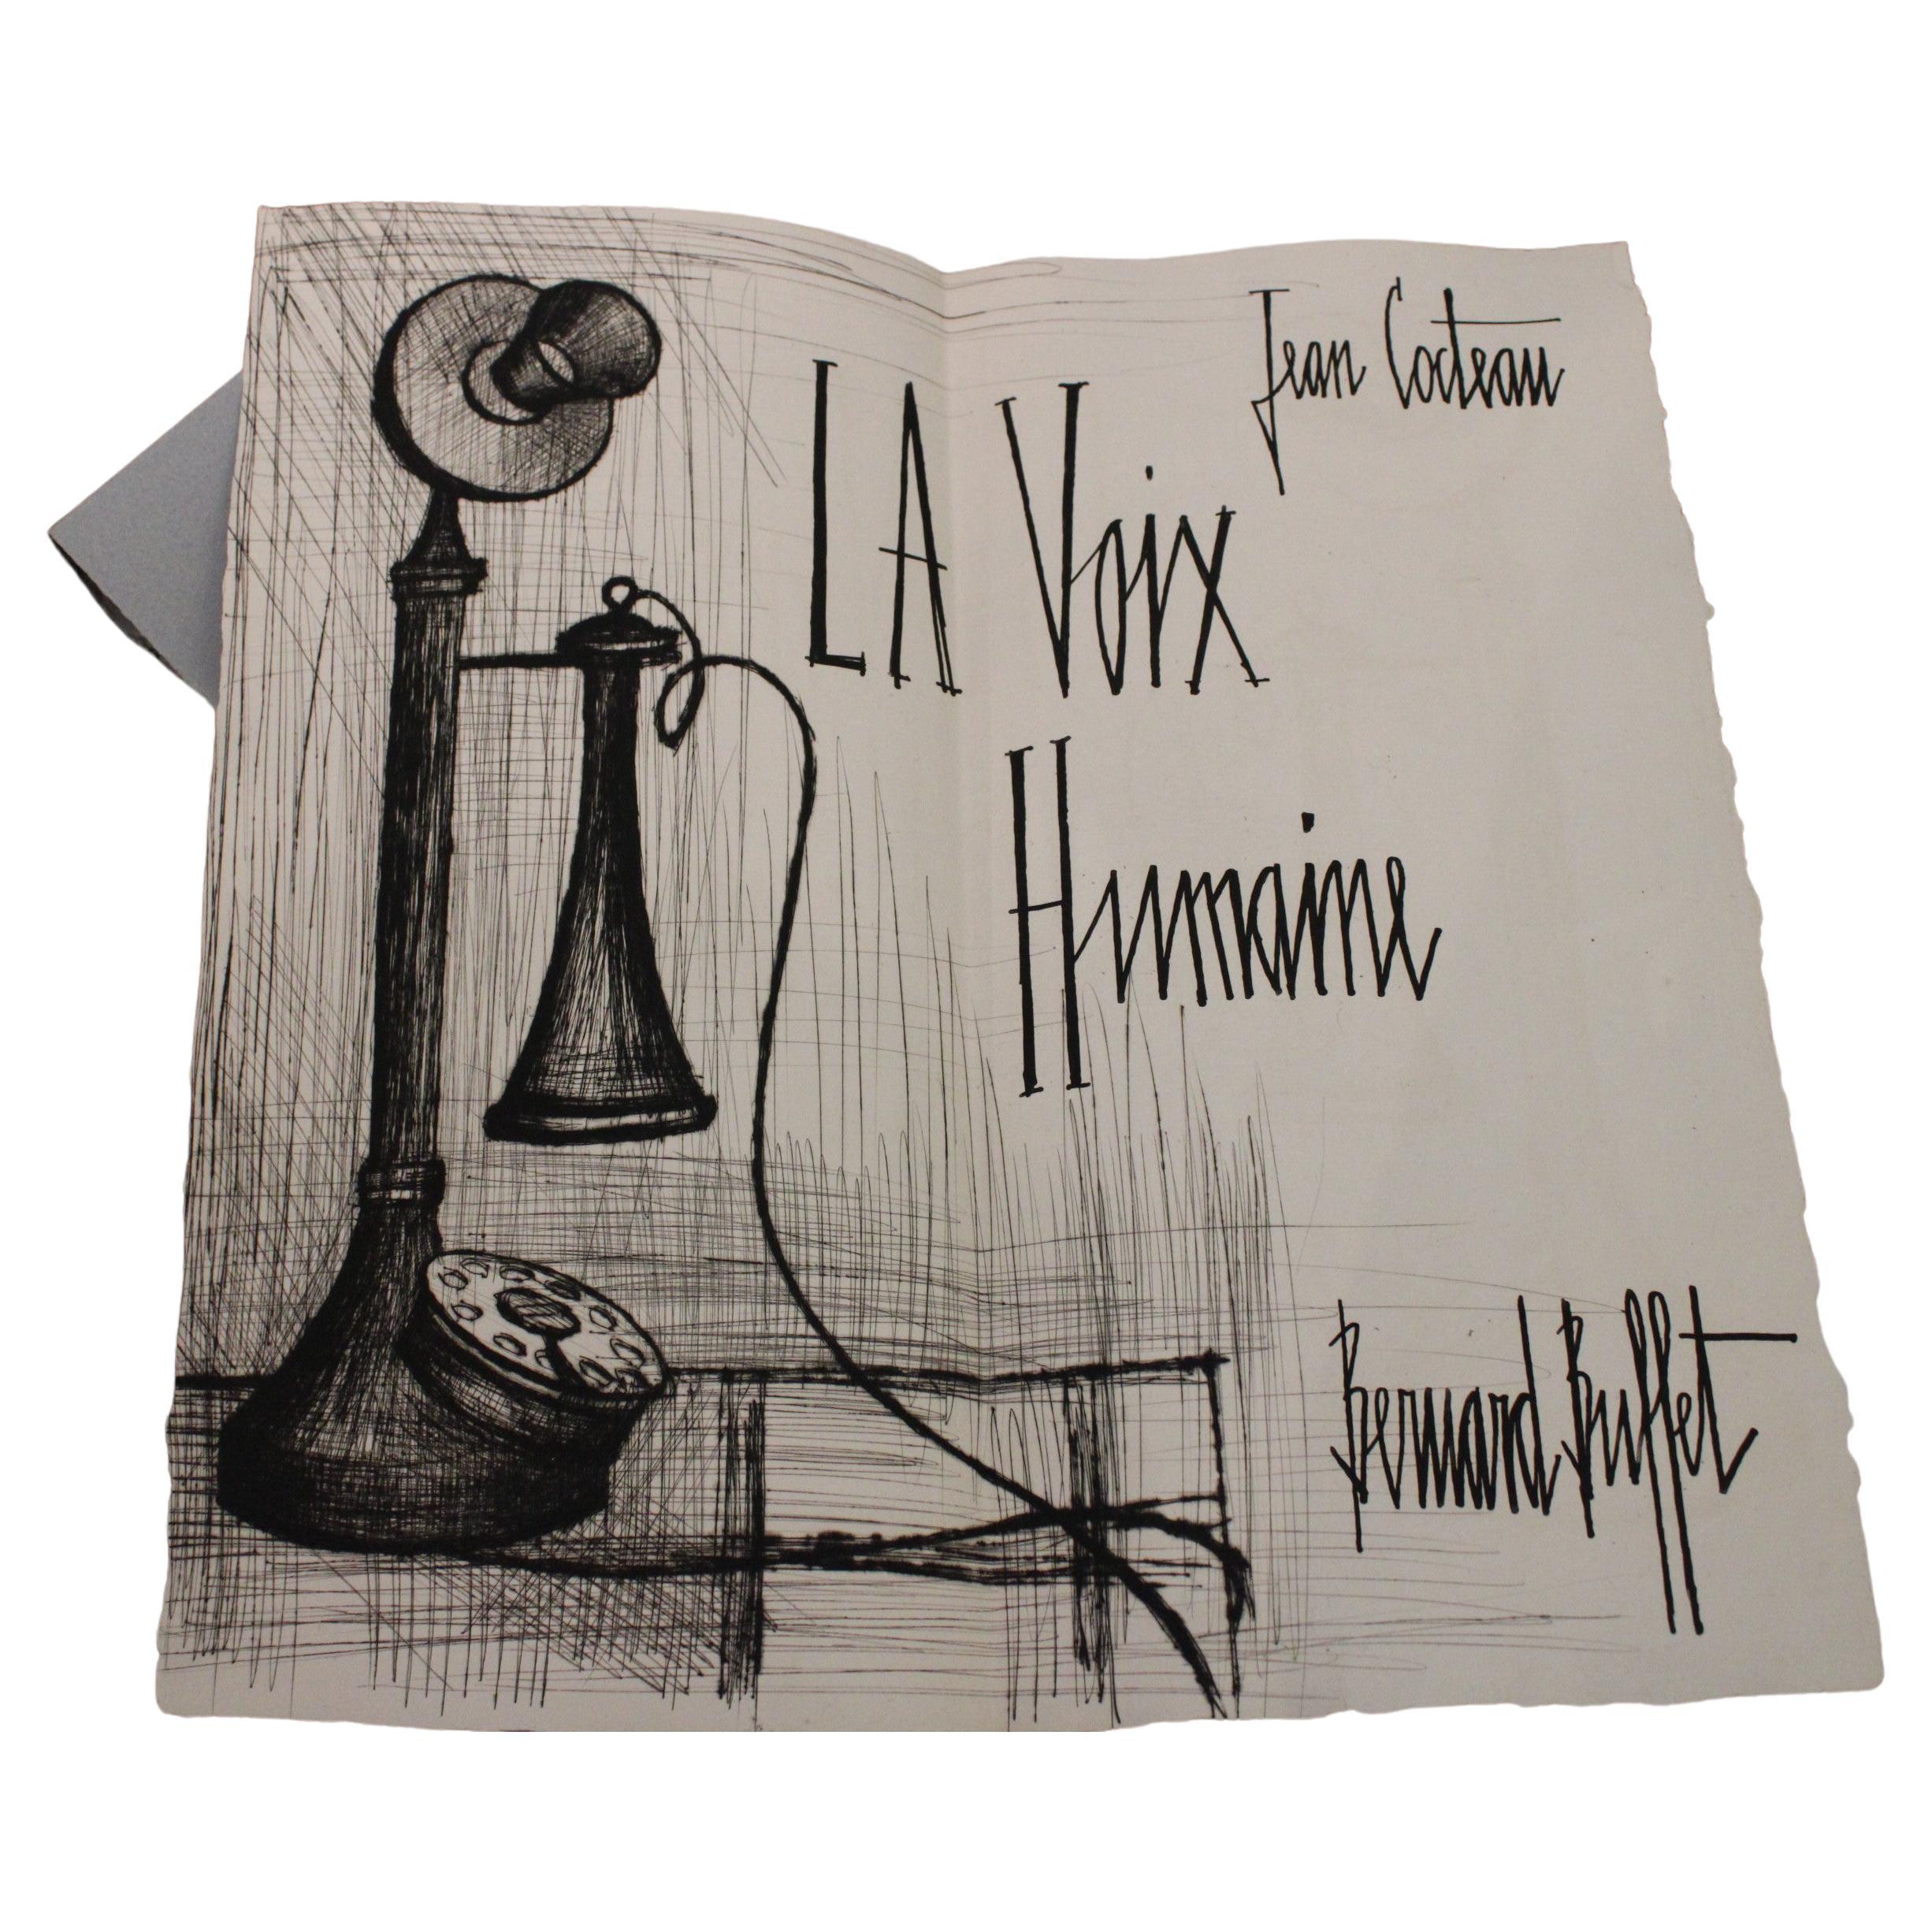 Bernard Buffet and Jean Cocteau "La Voix Humaine" For Sale at 1stDibs